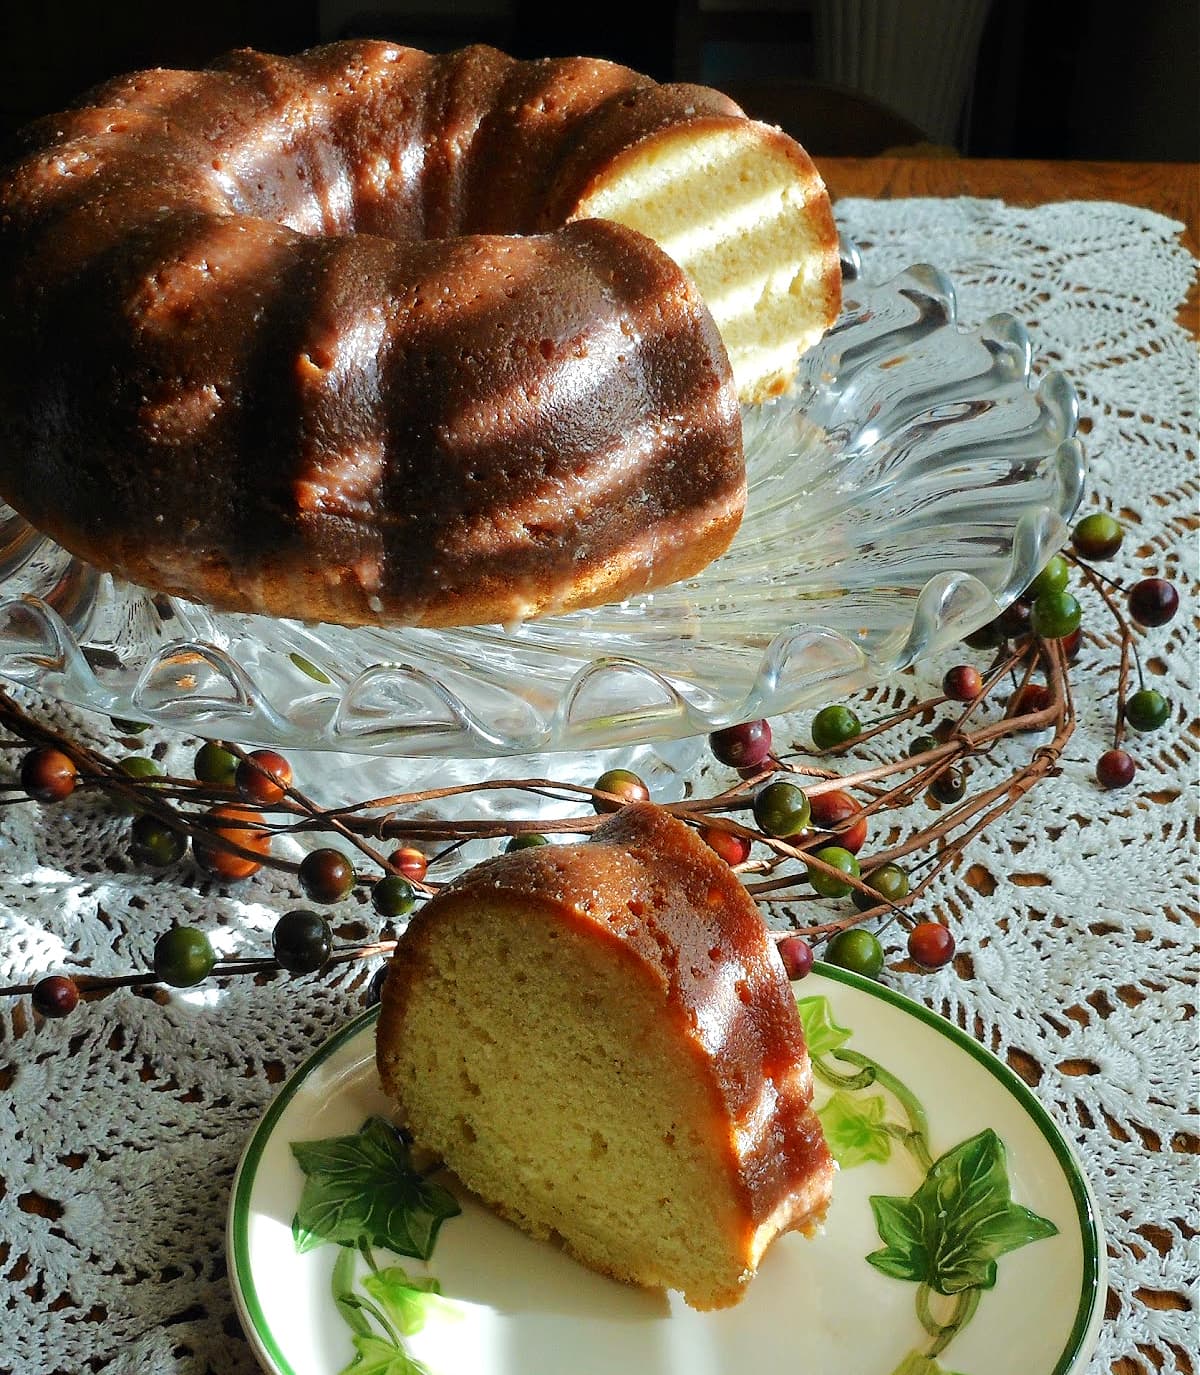 Slice of bundt cake on old fashioned ivy plate, sitting on crocheted tablecloth.